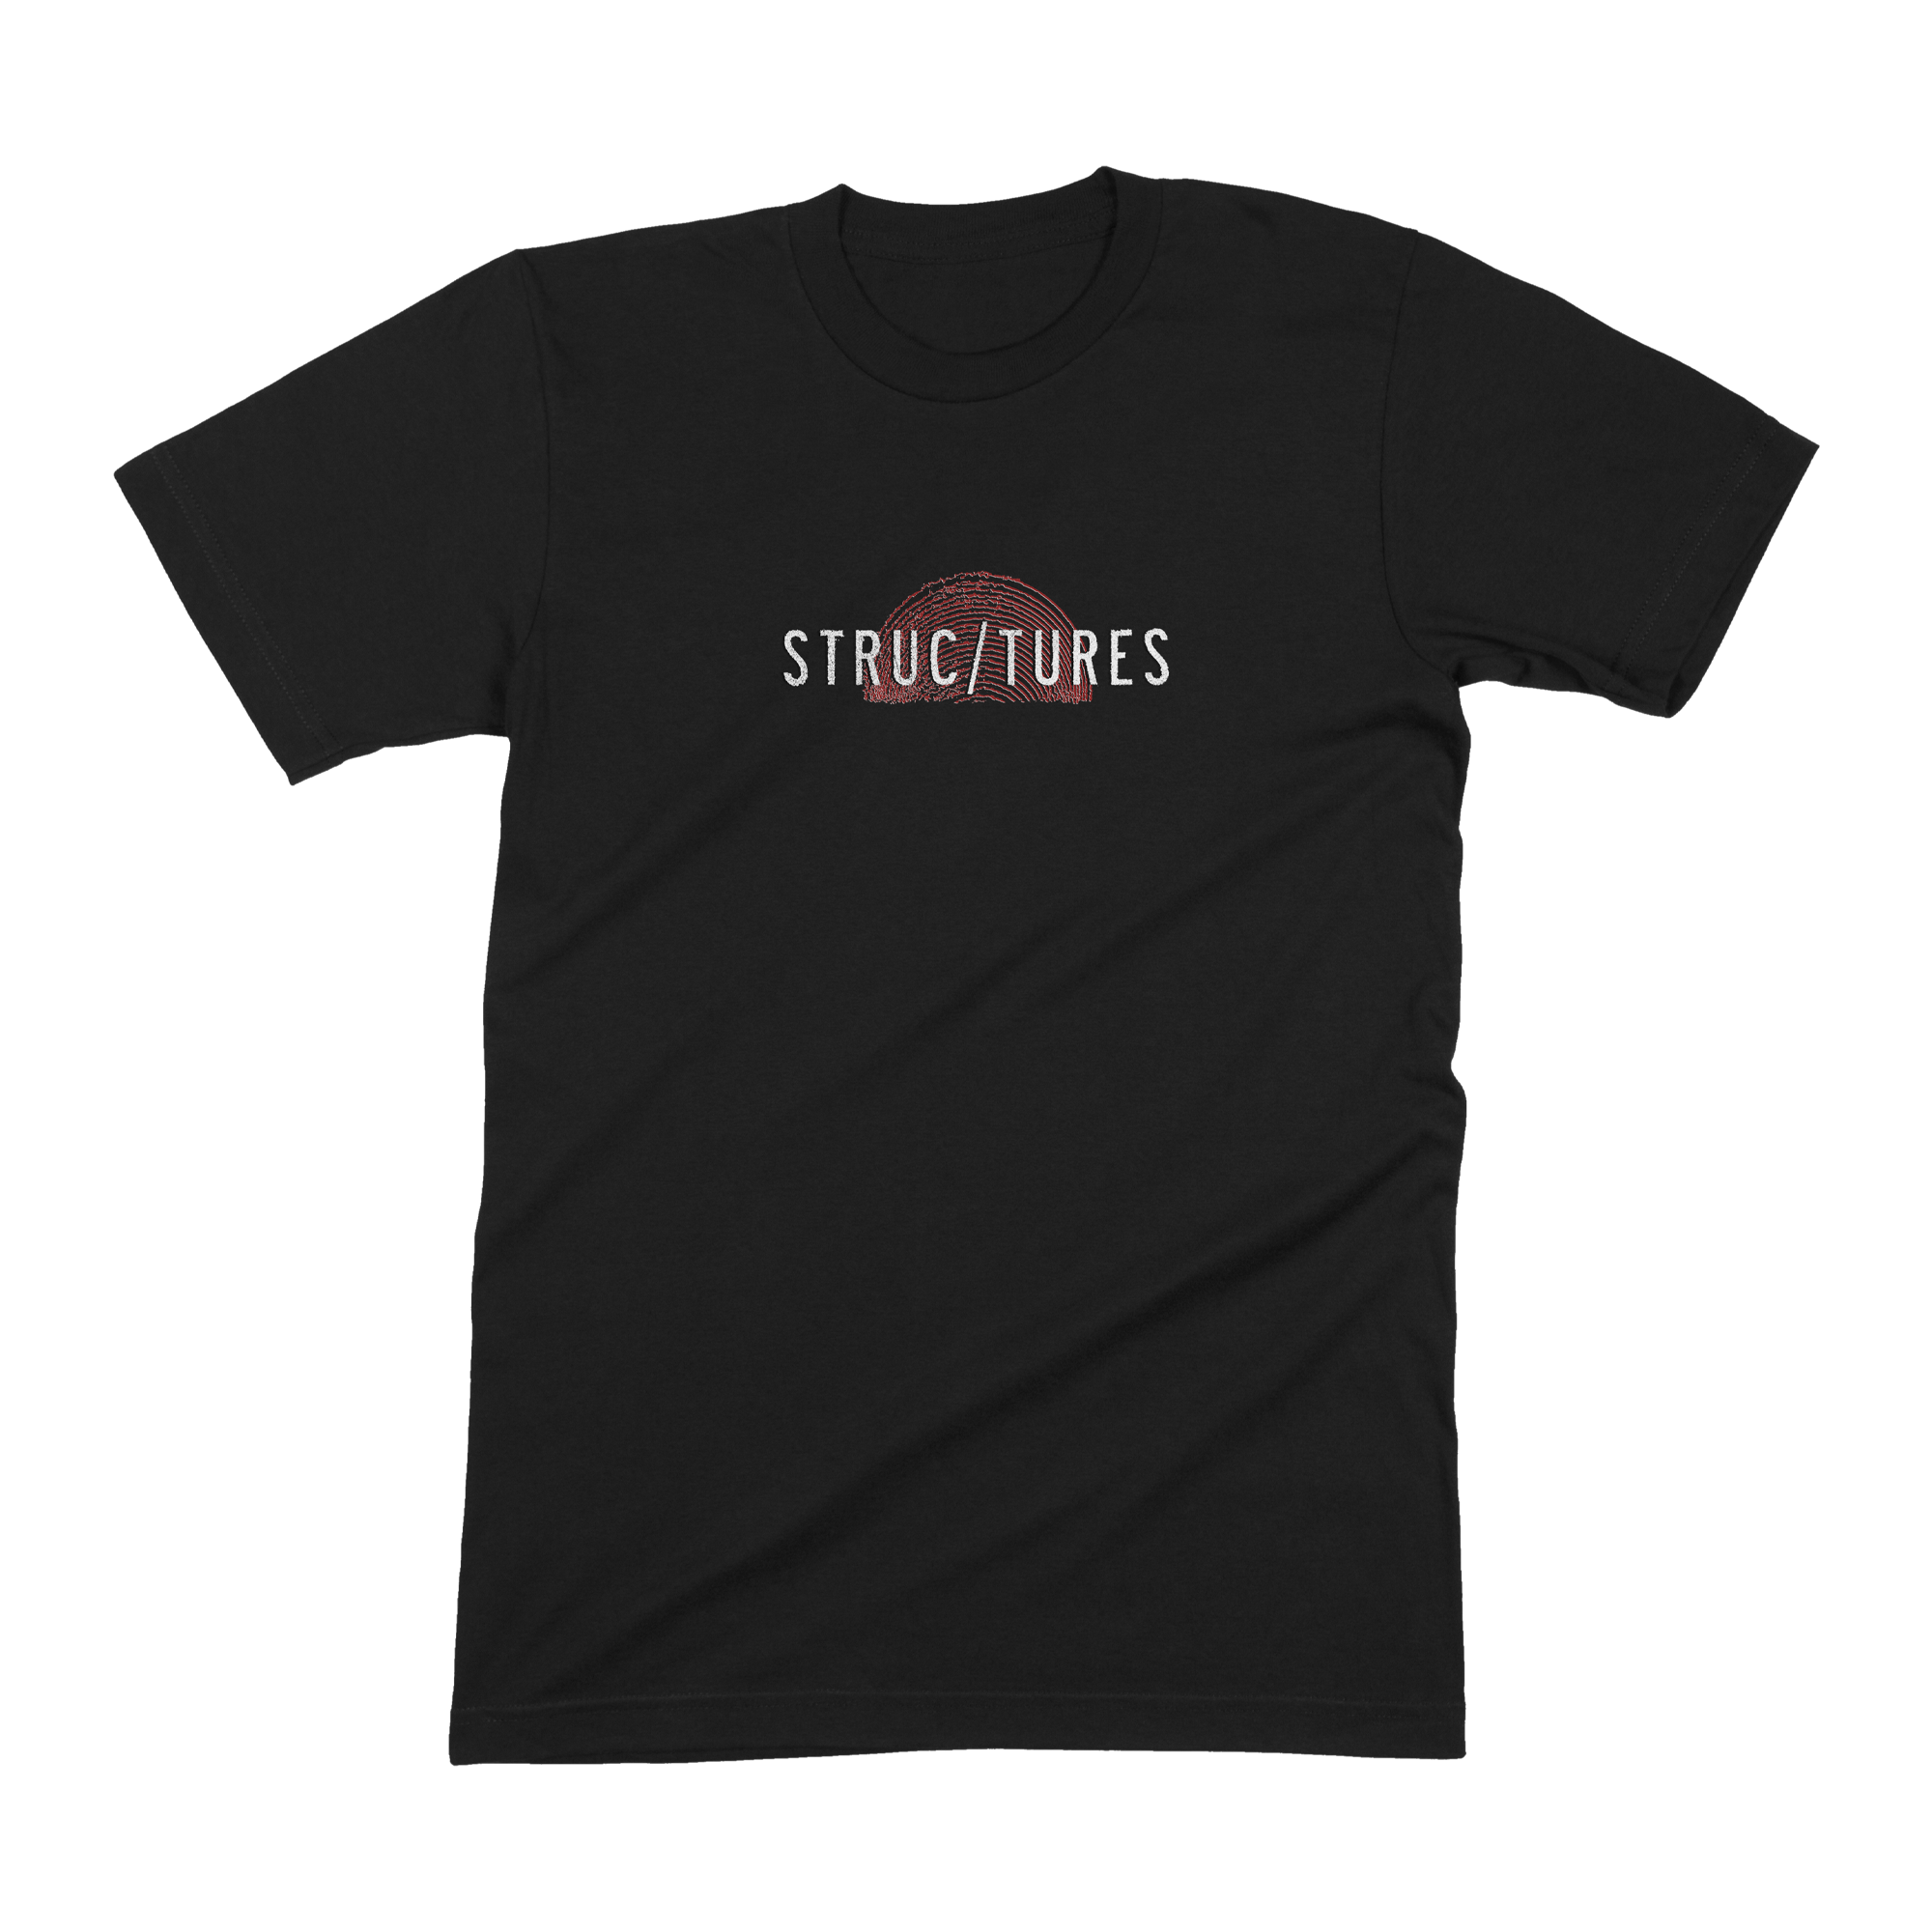 Structures - Fortune Fades Shirt